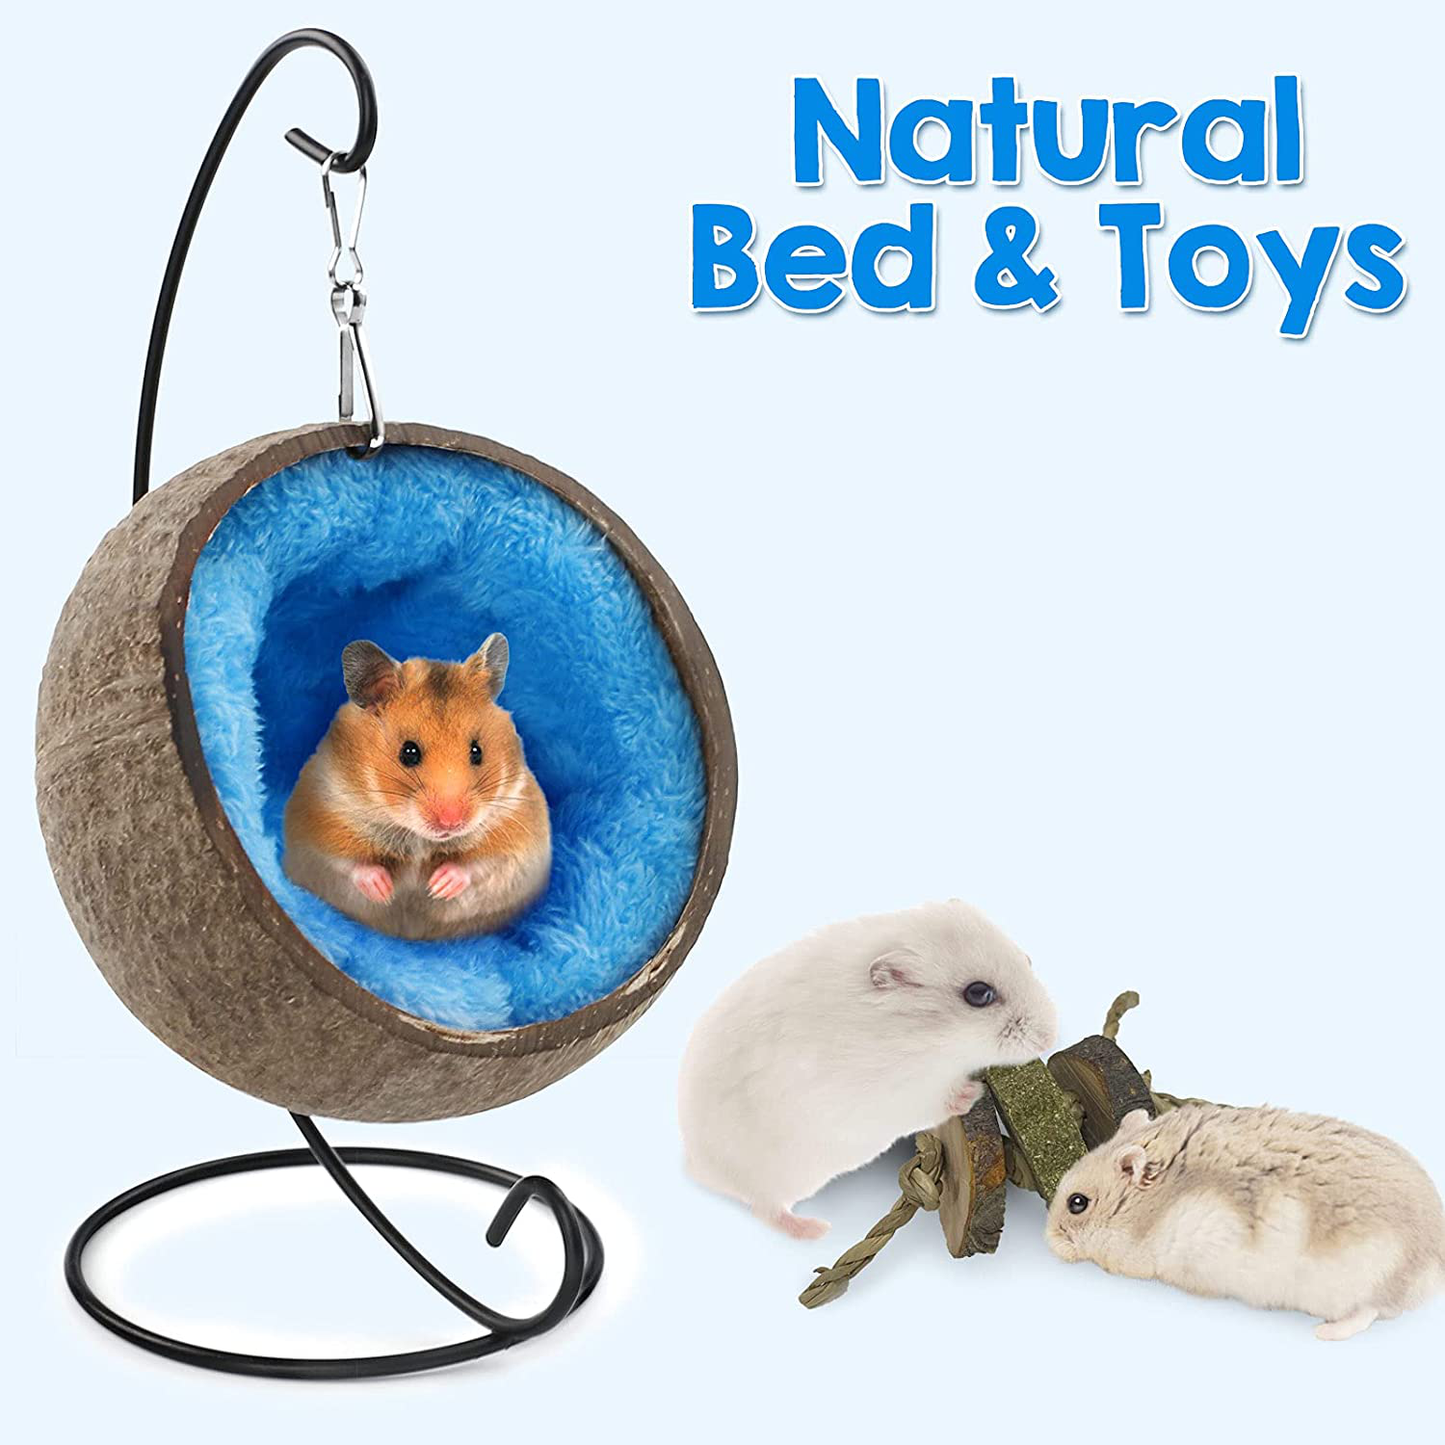 Ranslen Natural Coconut Hamster Hideout Hammock with Molar Toy, Coconut Husk Hamster Bed House with Warm Pad,Small Animal Habitat Decor Accessories Hanging Loop (Brown) Animals & Pet Supplies > Pet Supplies > Small Animal Supplies > Small Animal Habitat Accessories Ranslen   